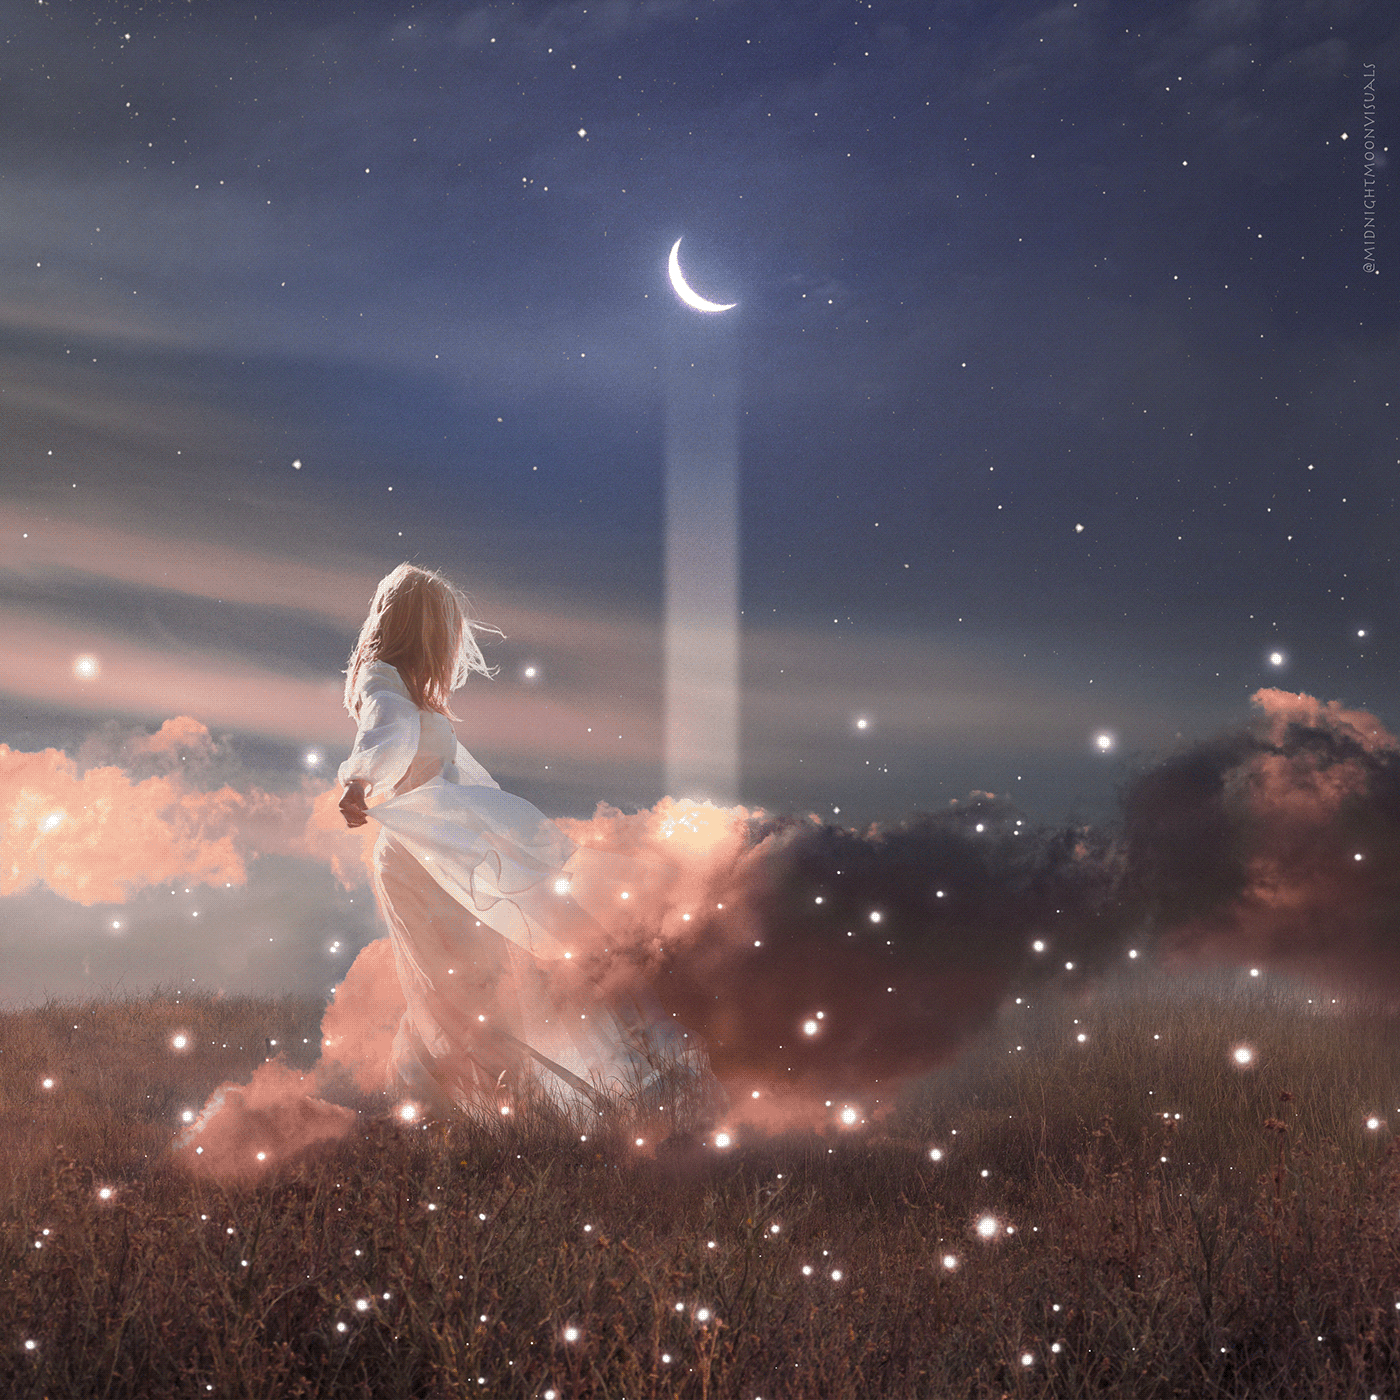 aesthetic clouds cosmic divinefeminine dreamy ethereal goddess moonlight Nature surreal